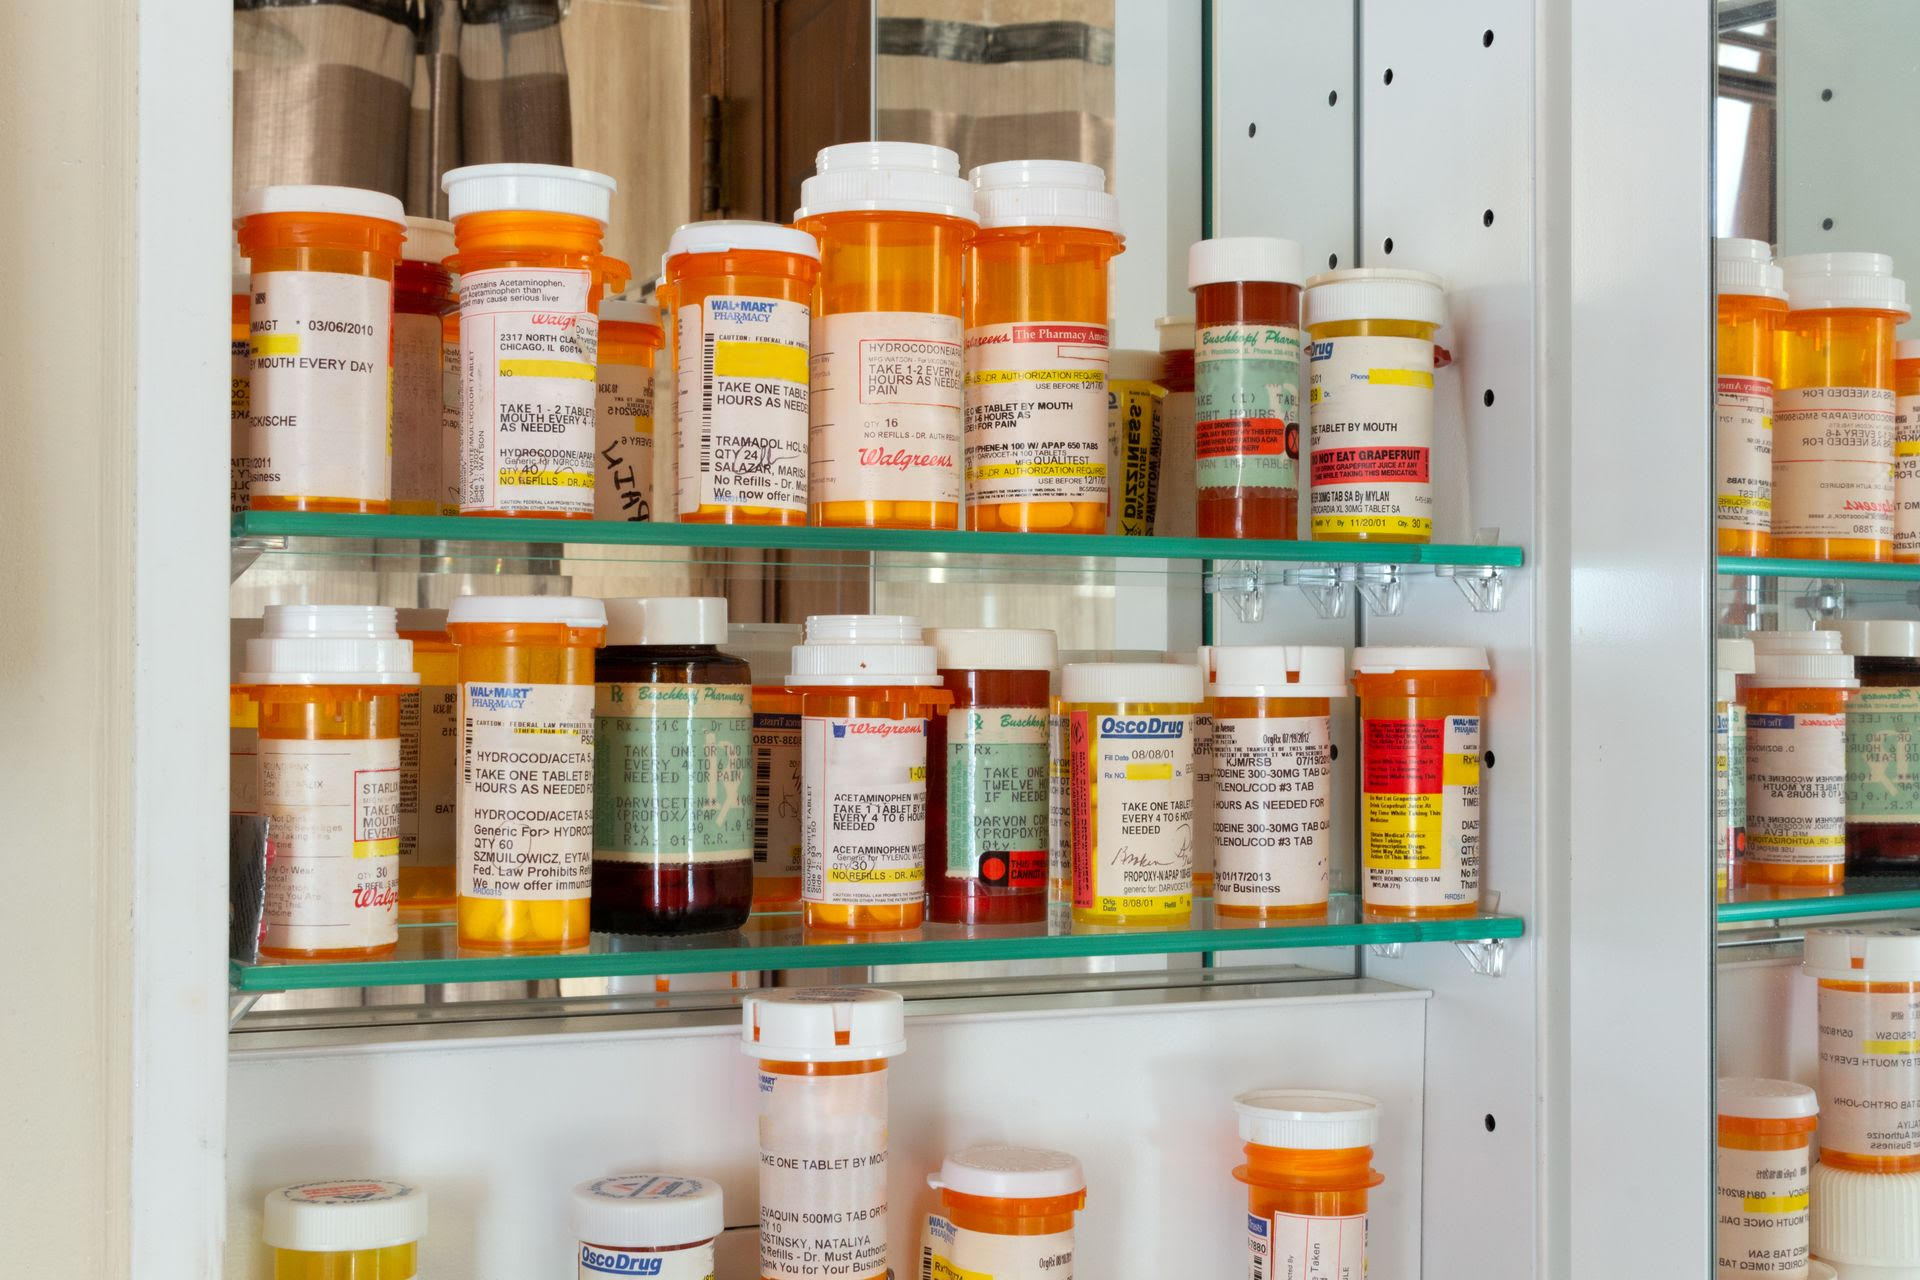 the most commonly abused drugs in the United States are almost all legal medicines